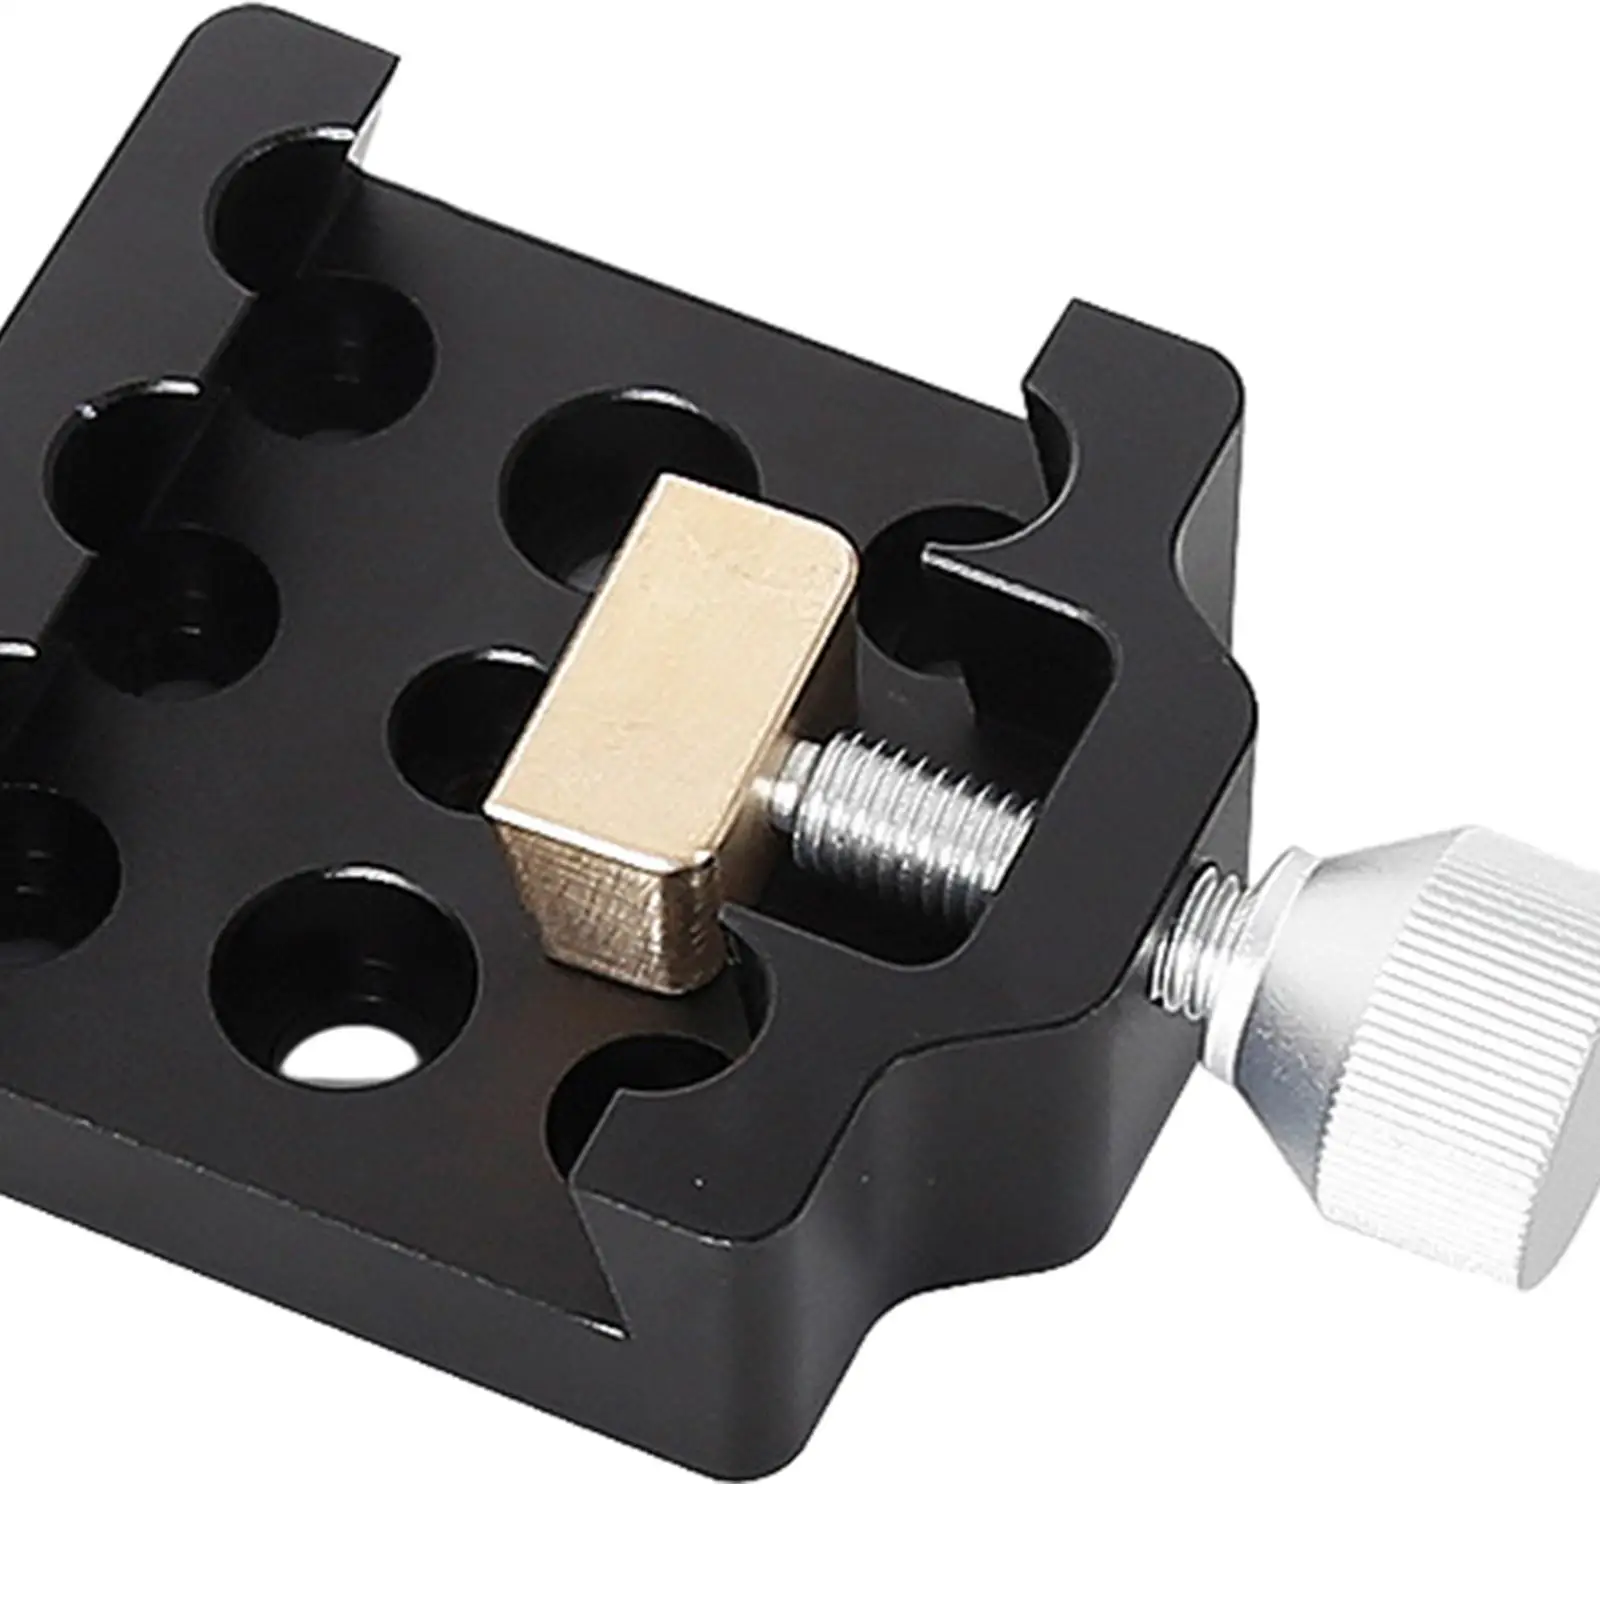 Telescope Adapter Mount Base Saddle Clamp Metal for Telescopes and Cameras